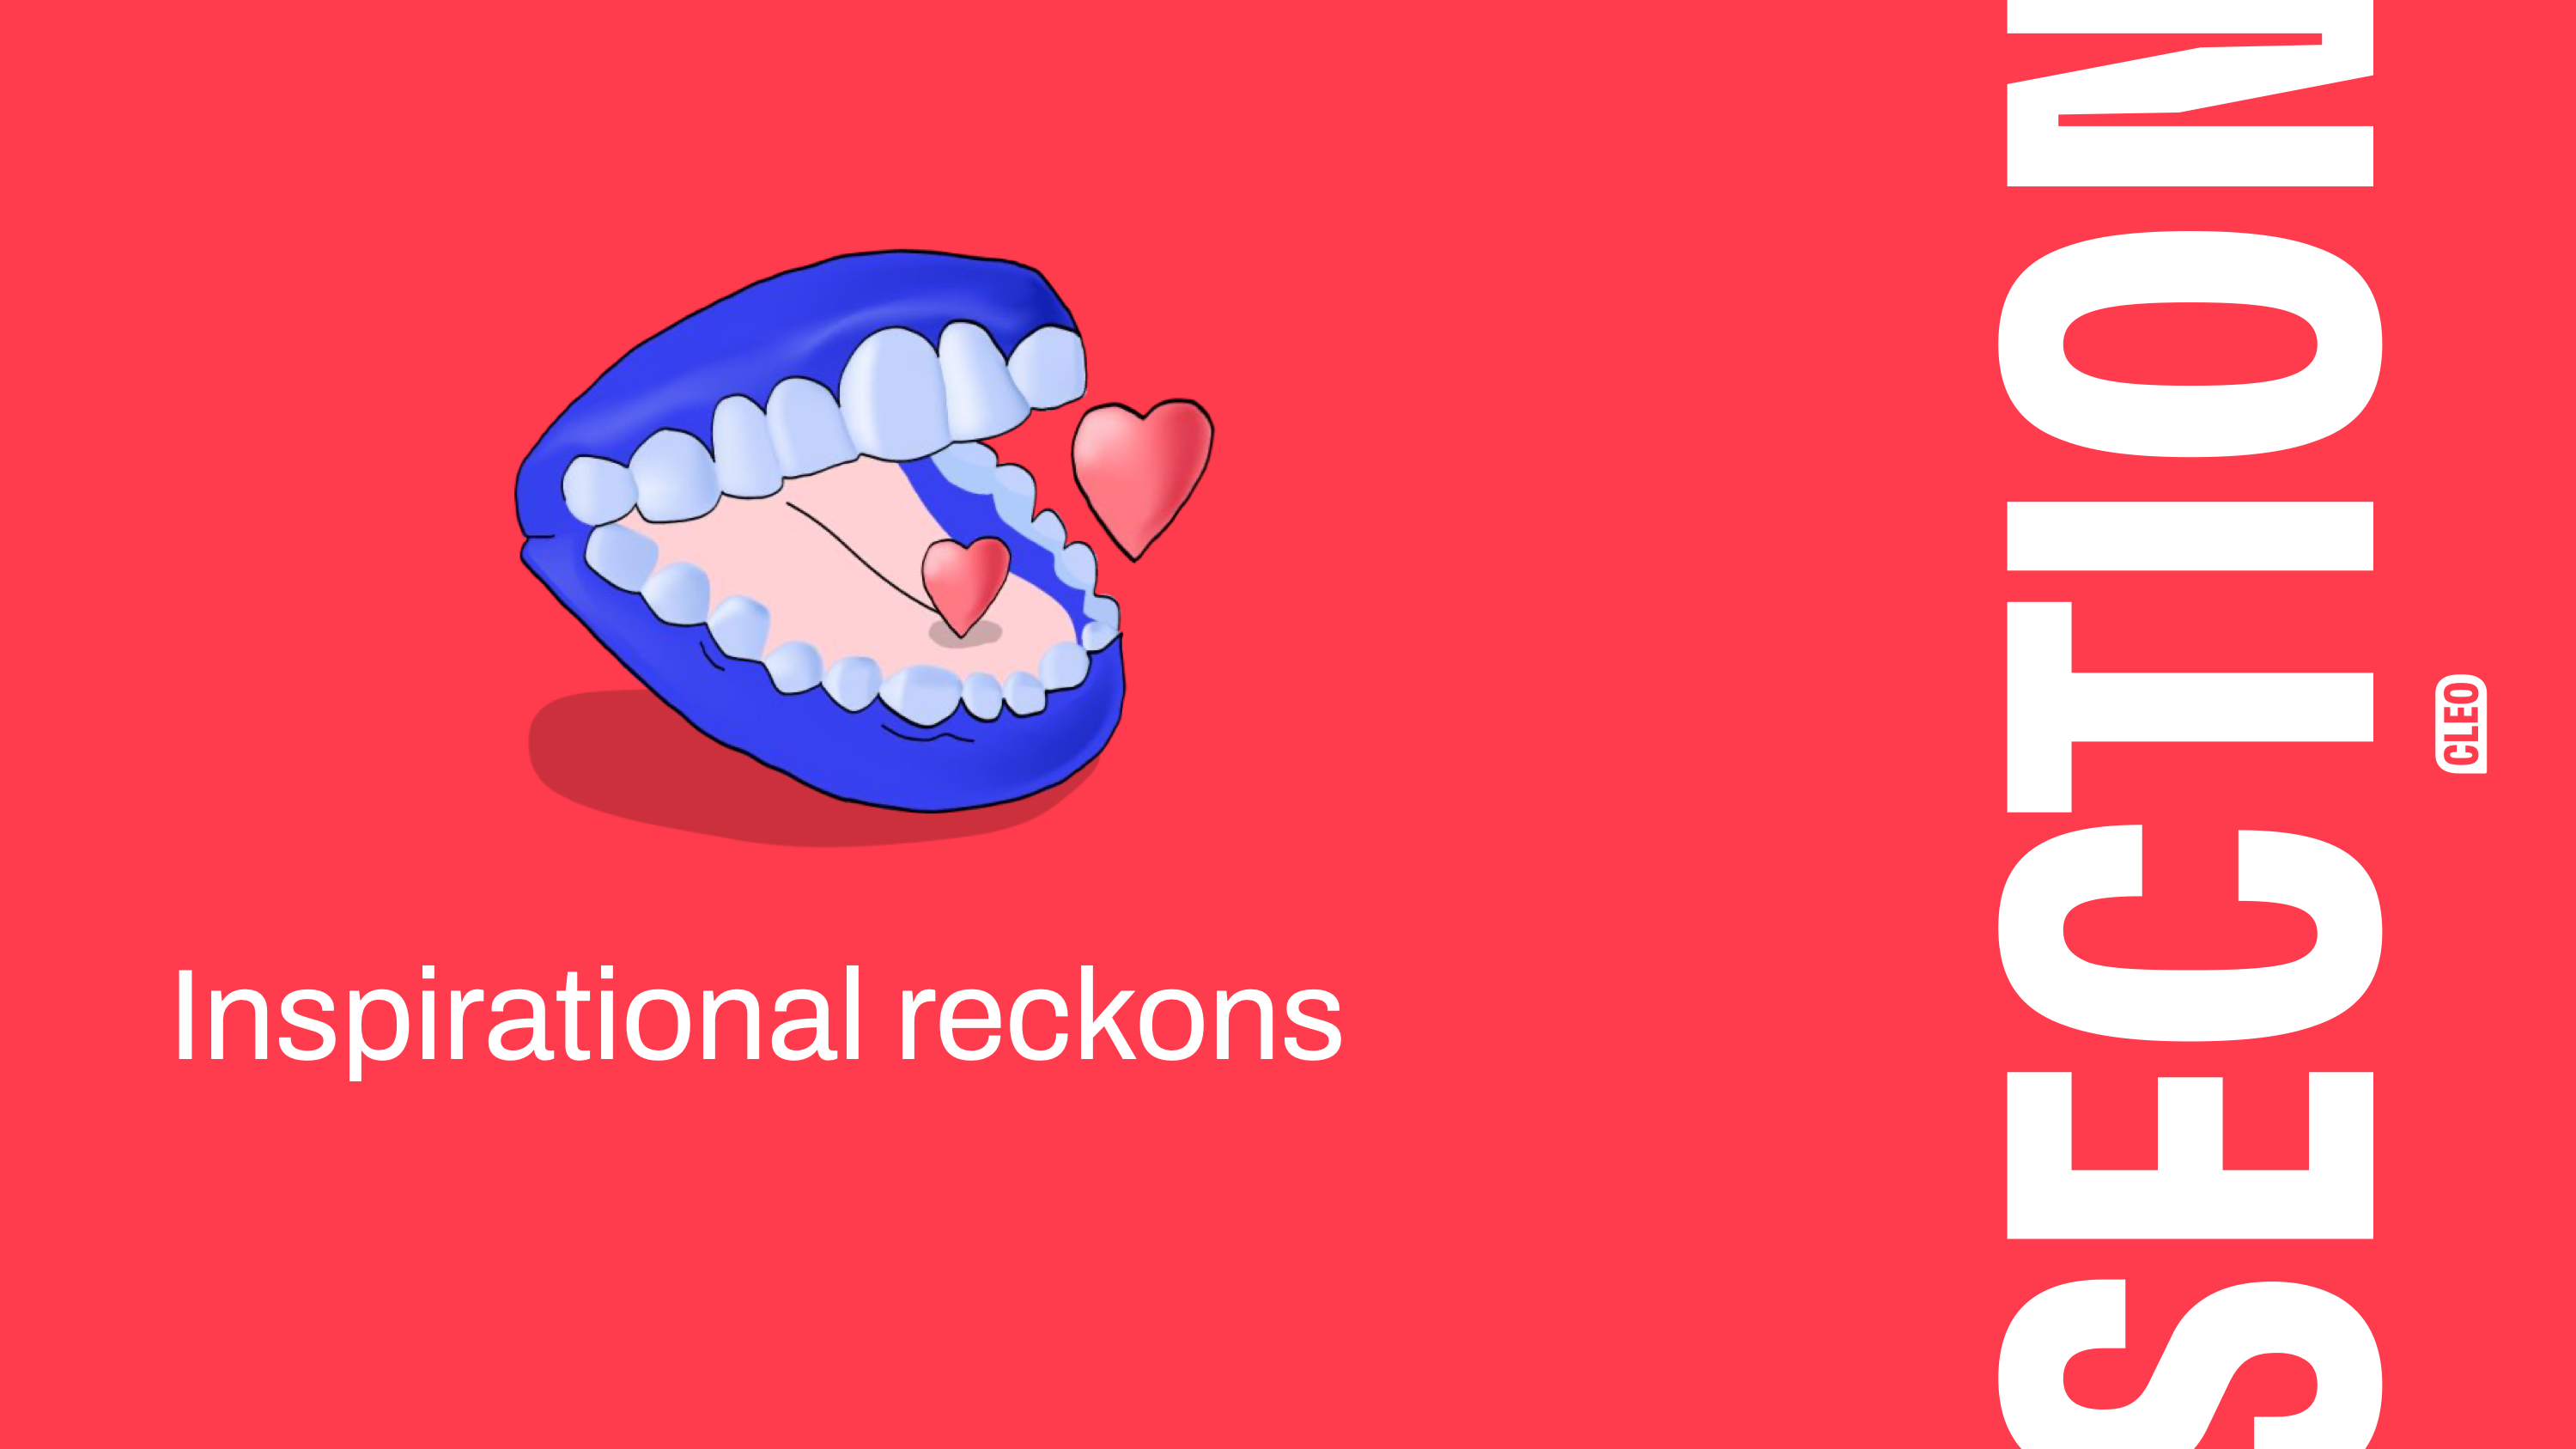 A section title for Inspirational reckons; There's an image of a blue mouth with teeth that has hearts coming out of it; text: inspirational reckons